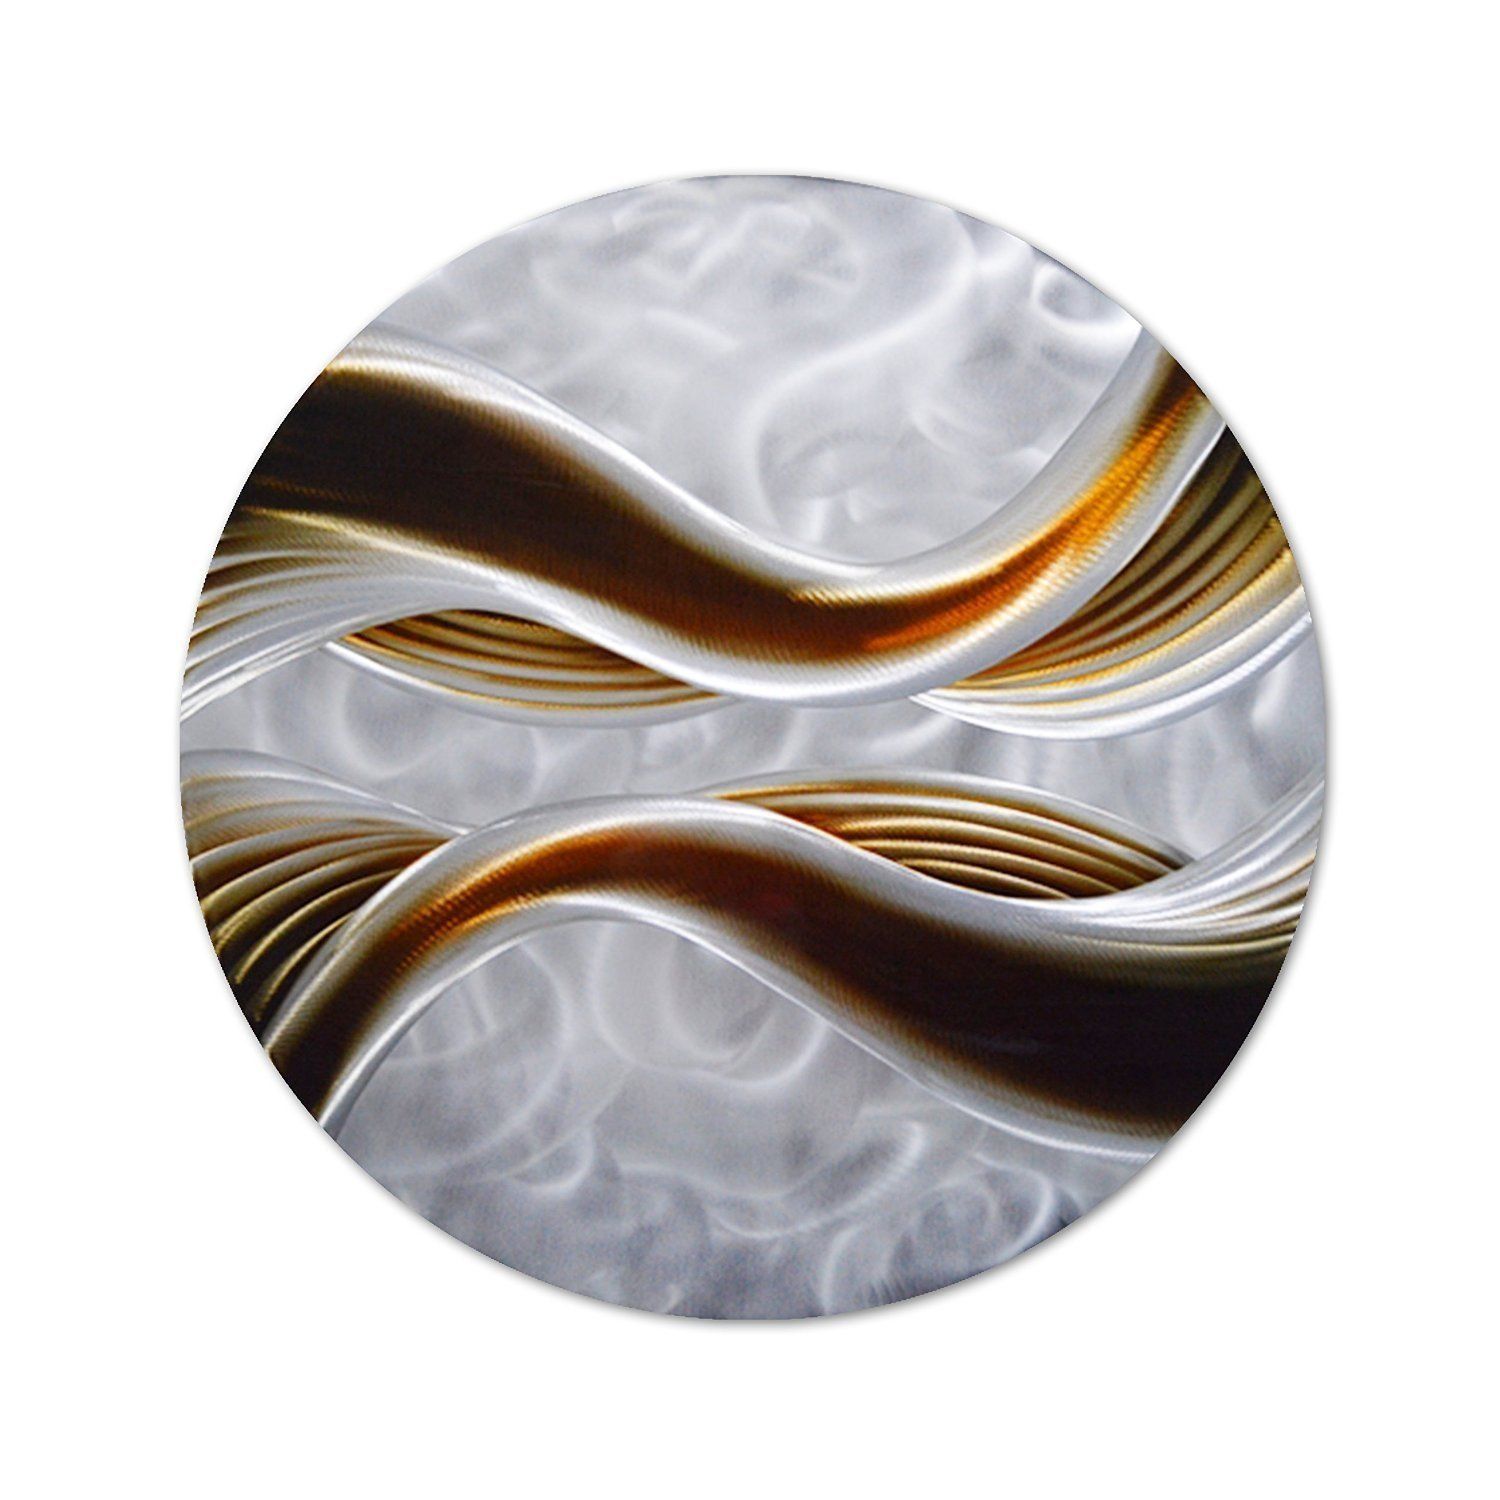 Pure Art Caramel Desire Metal Wall Art, Round Metal Wall Decor In Intended For Latest Glossy Circle Metal Wall Art (View 8 of 20)